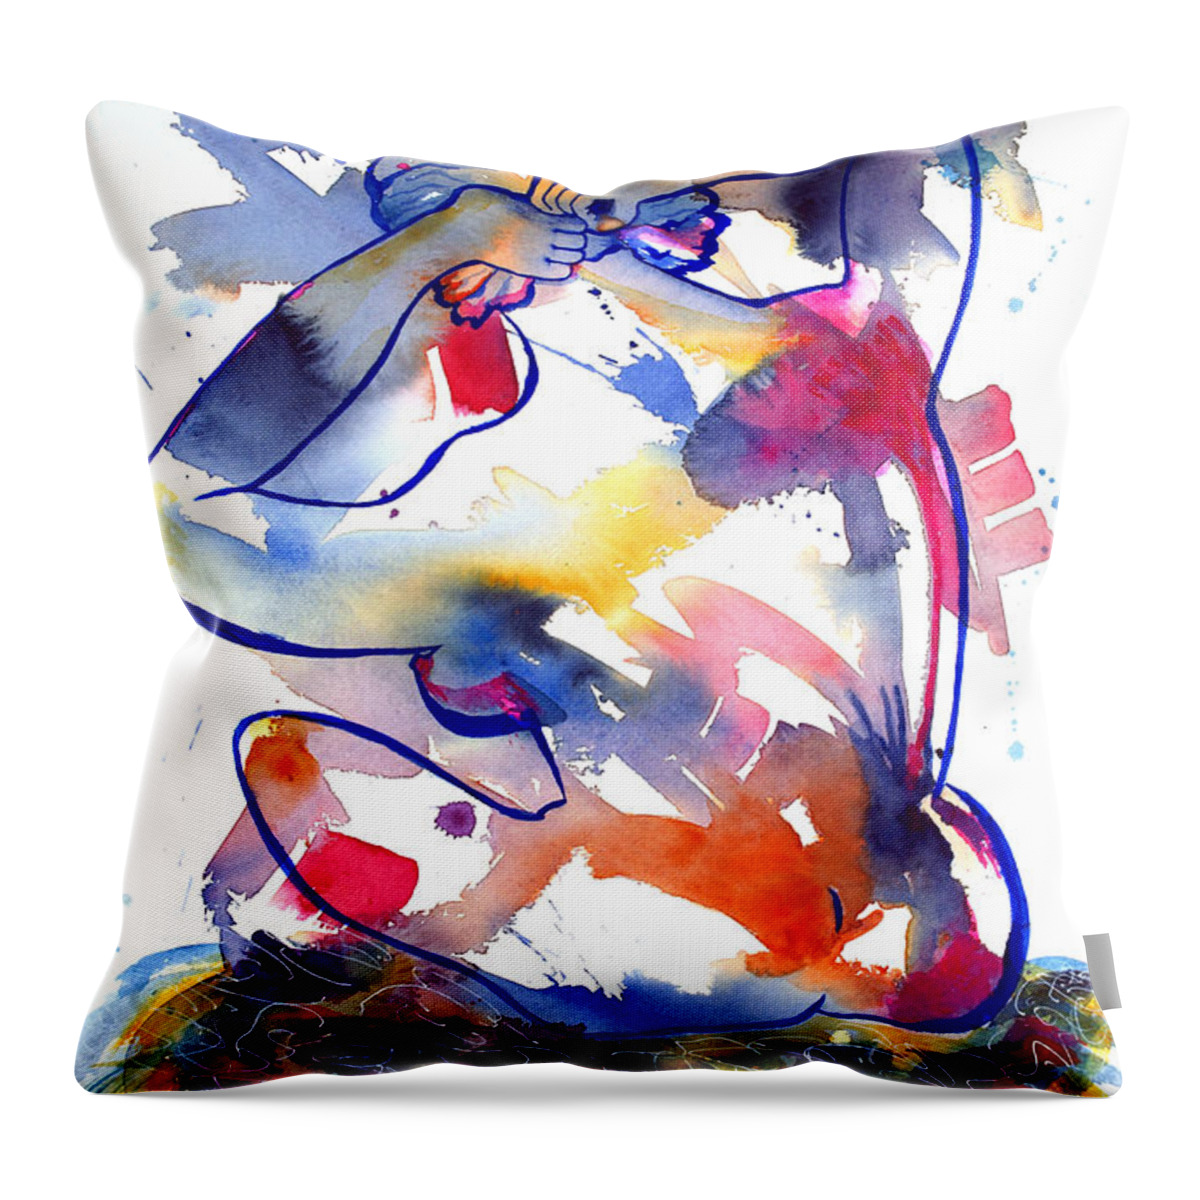 Nude Throw Pillow featuring the painting The Southside by Kim Shuckhart Gunns